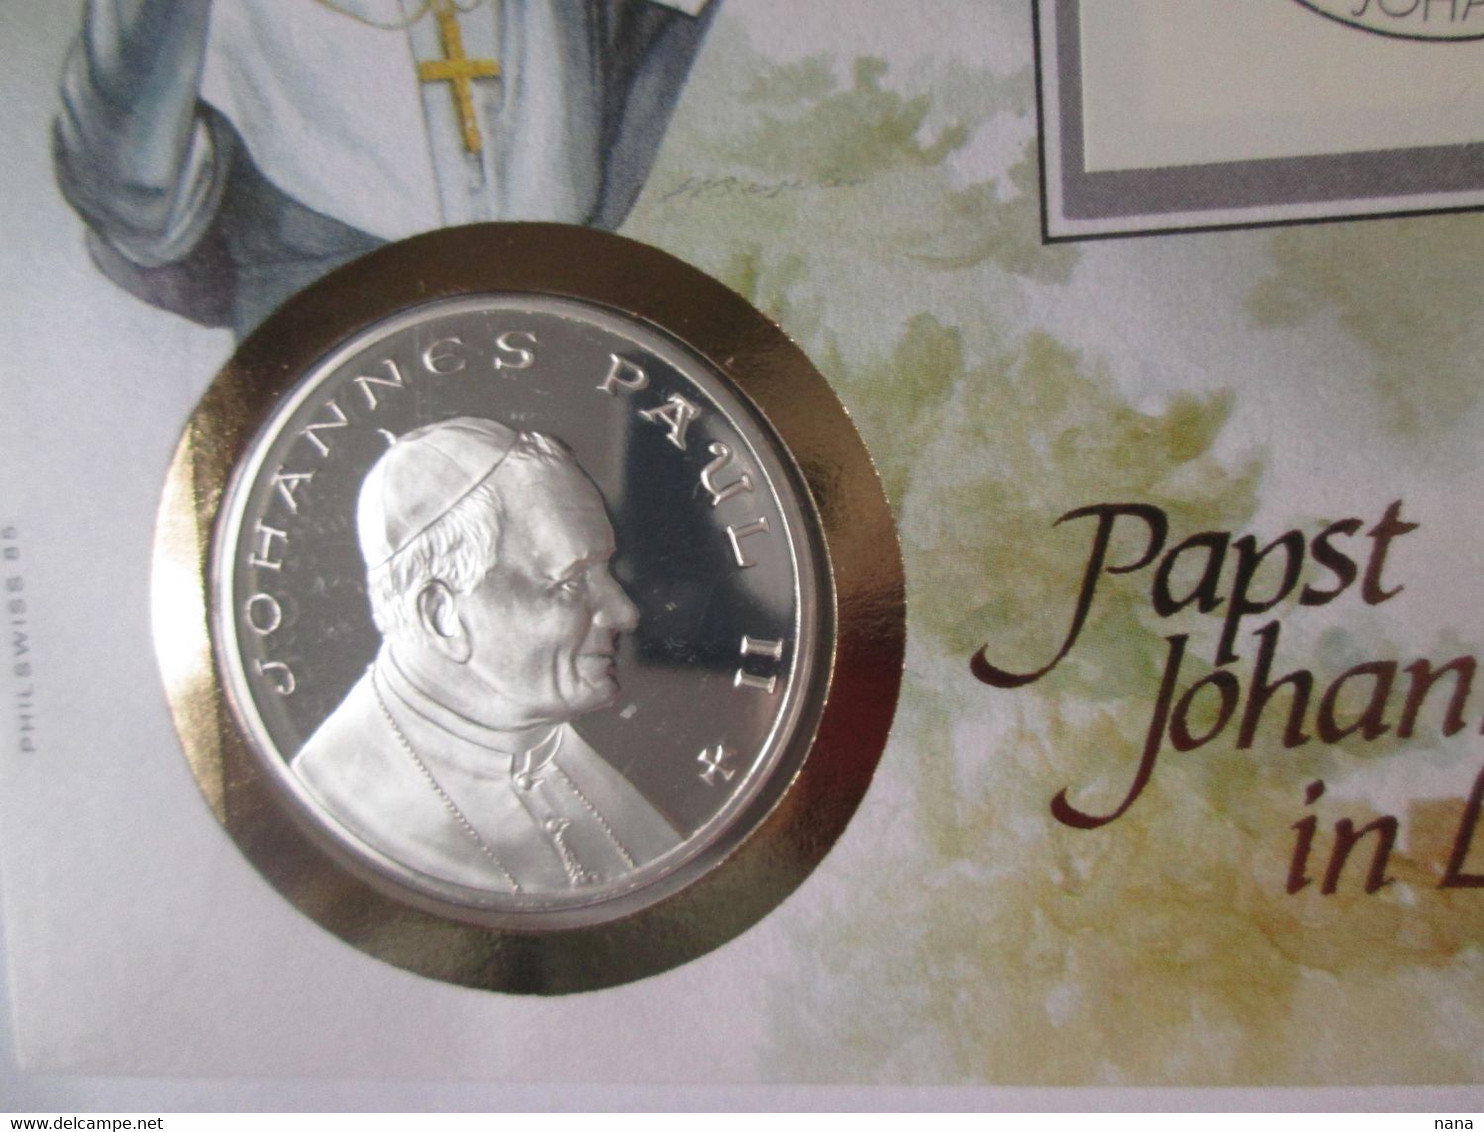 The Pope Johannes Paul II In Liechtenstein 1985 Envelope With Silver Commemorative Medal 999.9 Limited Edition 4000 Pc. - Covers & Documents